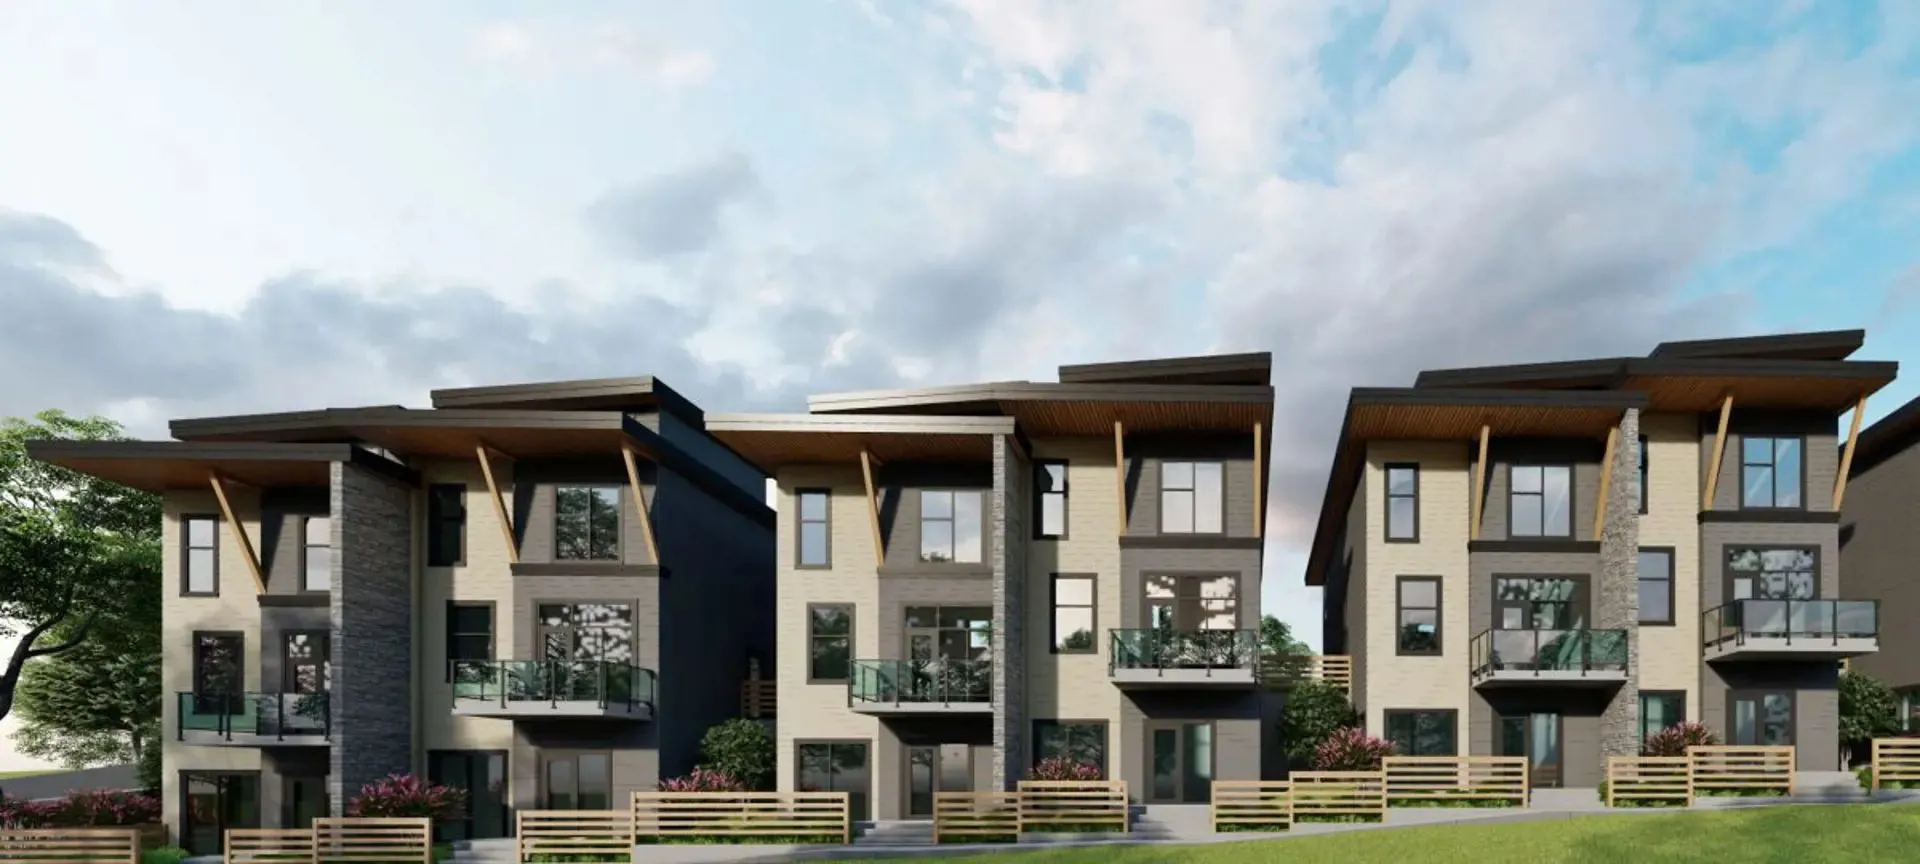 Riverside View by Panorama West Group is a 30-unit North Surrey townhome development.